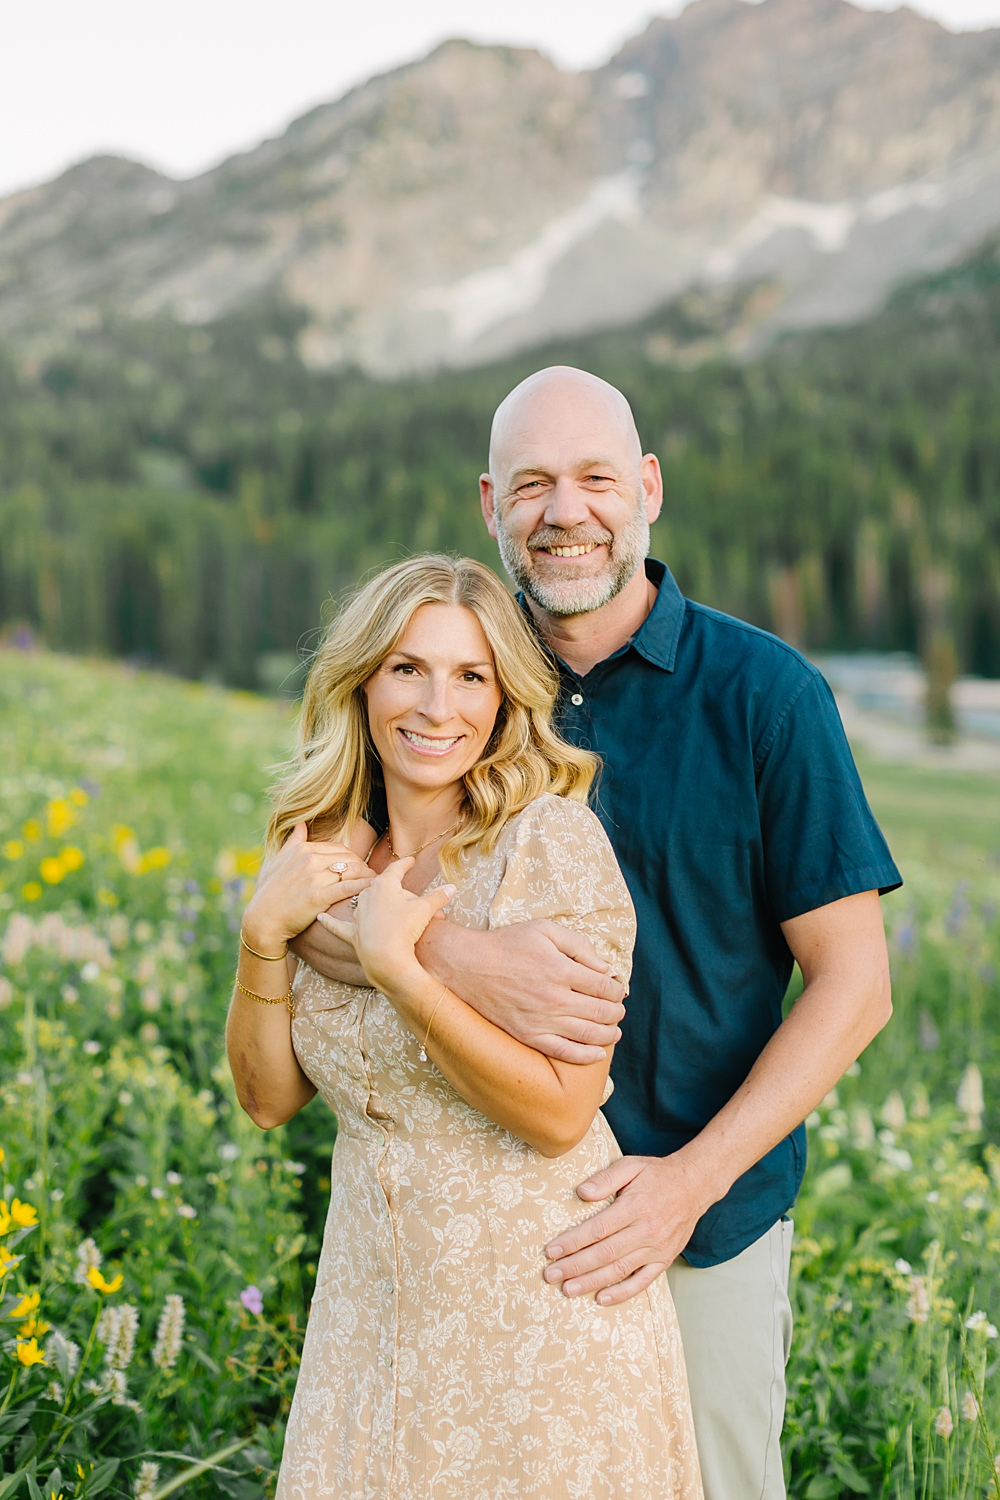 Albion Basin Family Pictures | Full Bloom